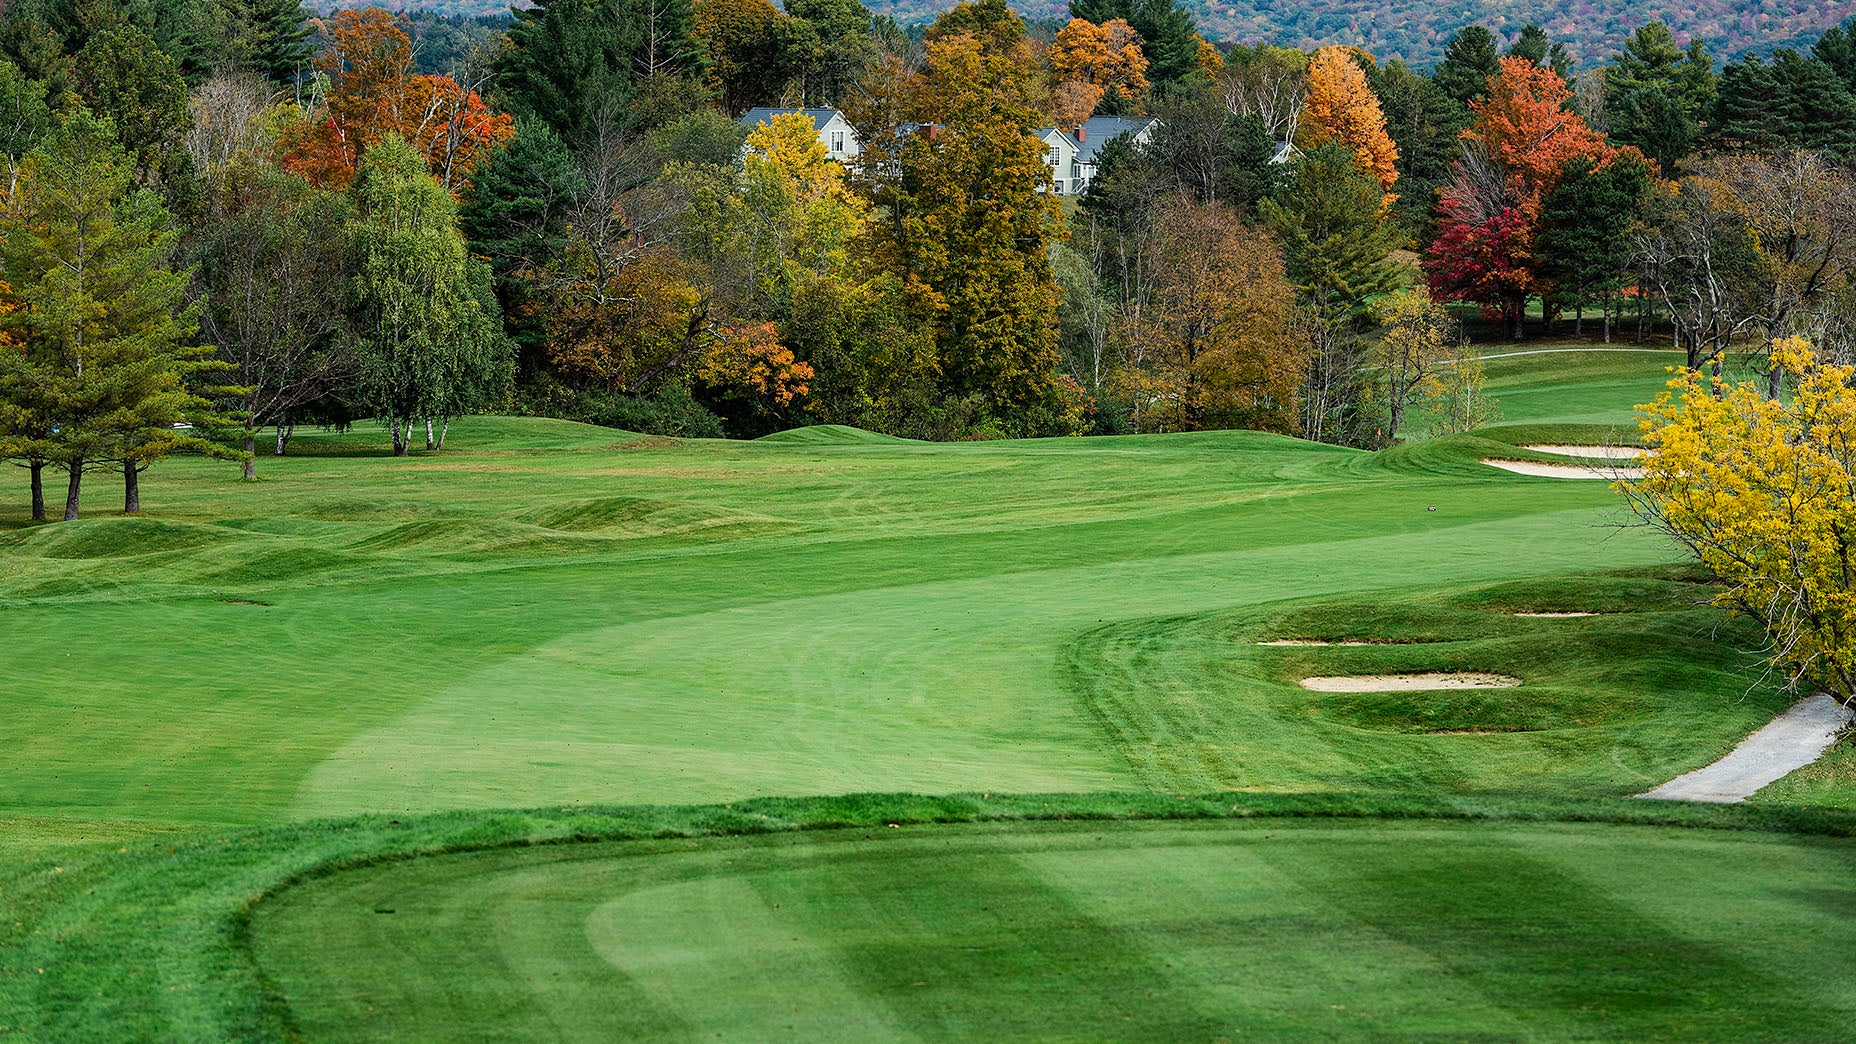 Best golf courses in Vermont, according to GOLF Magazine’s expert course raters